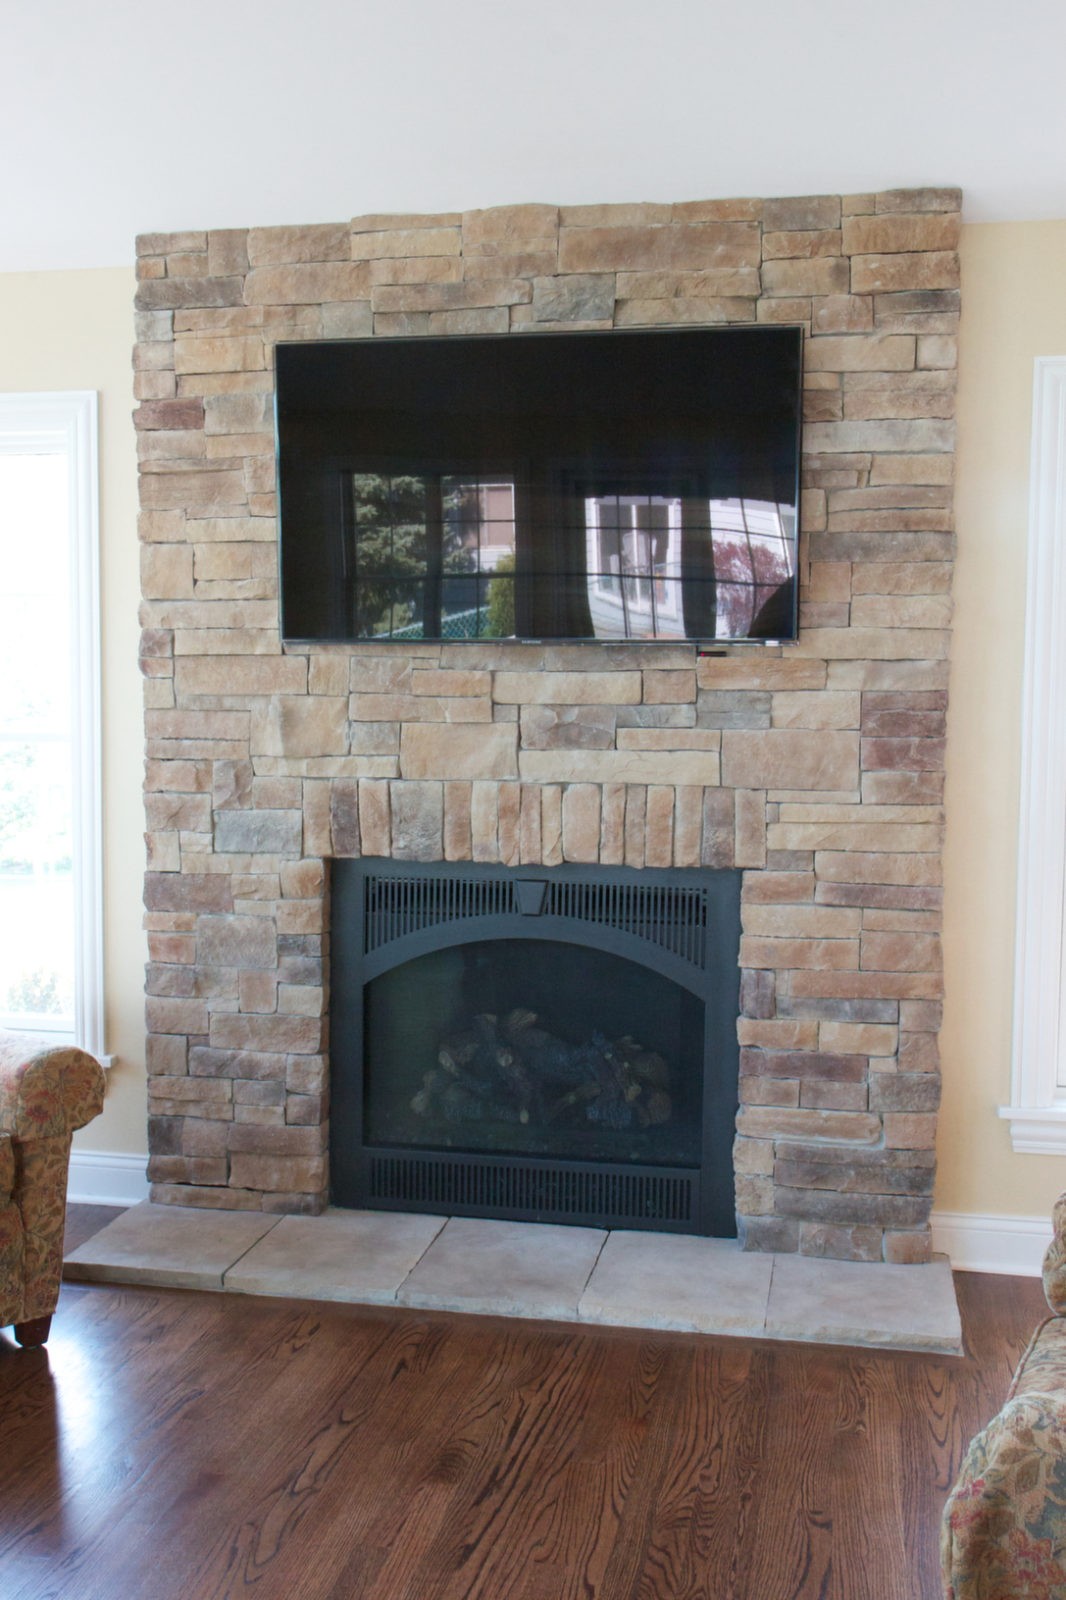 Mountain stack stone veneer fireplace with a fireplace screen and a TV